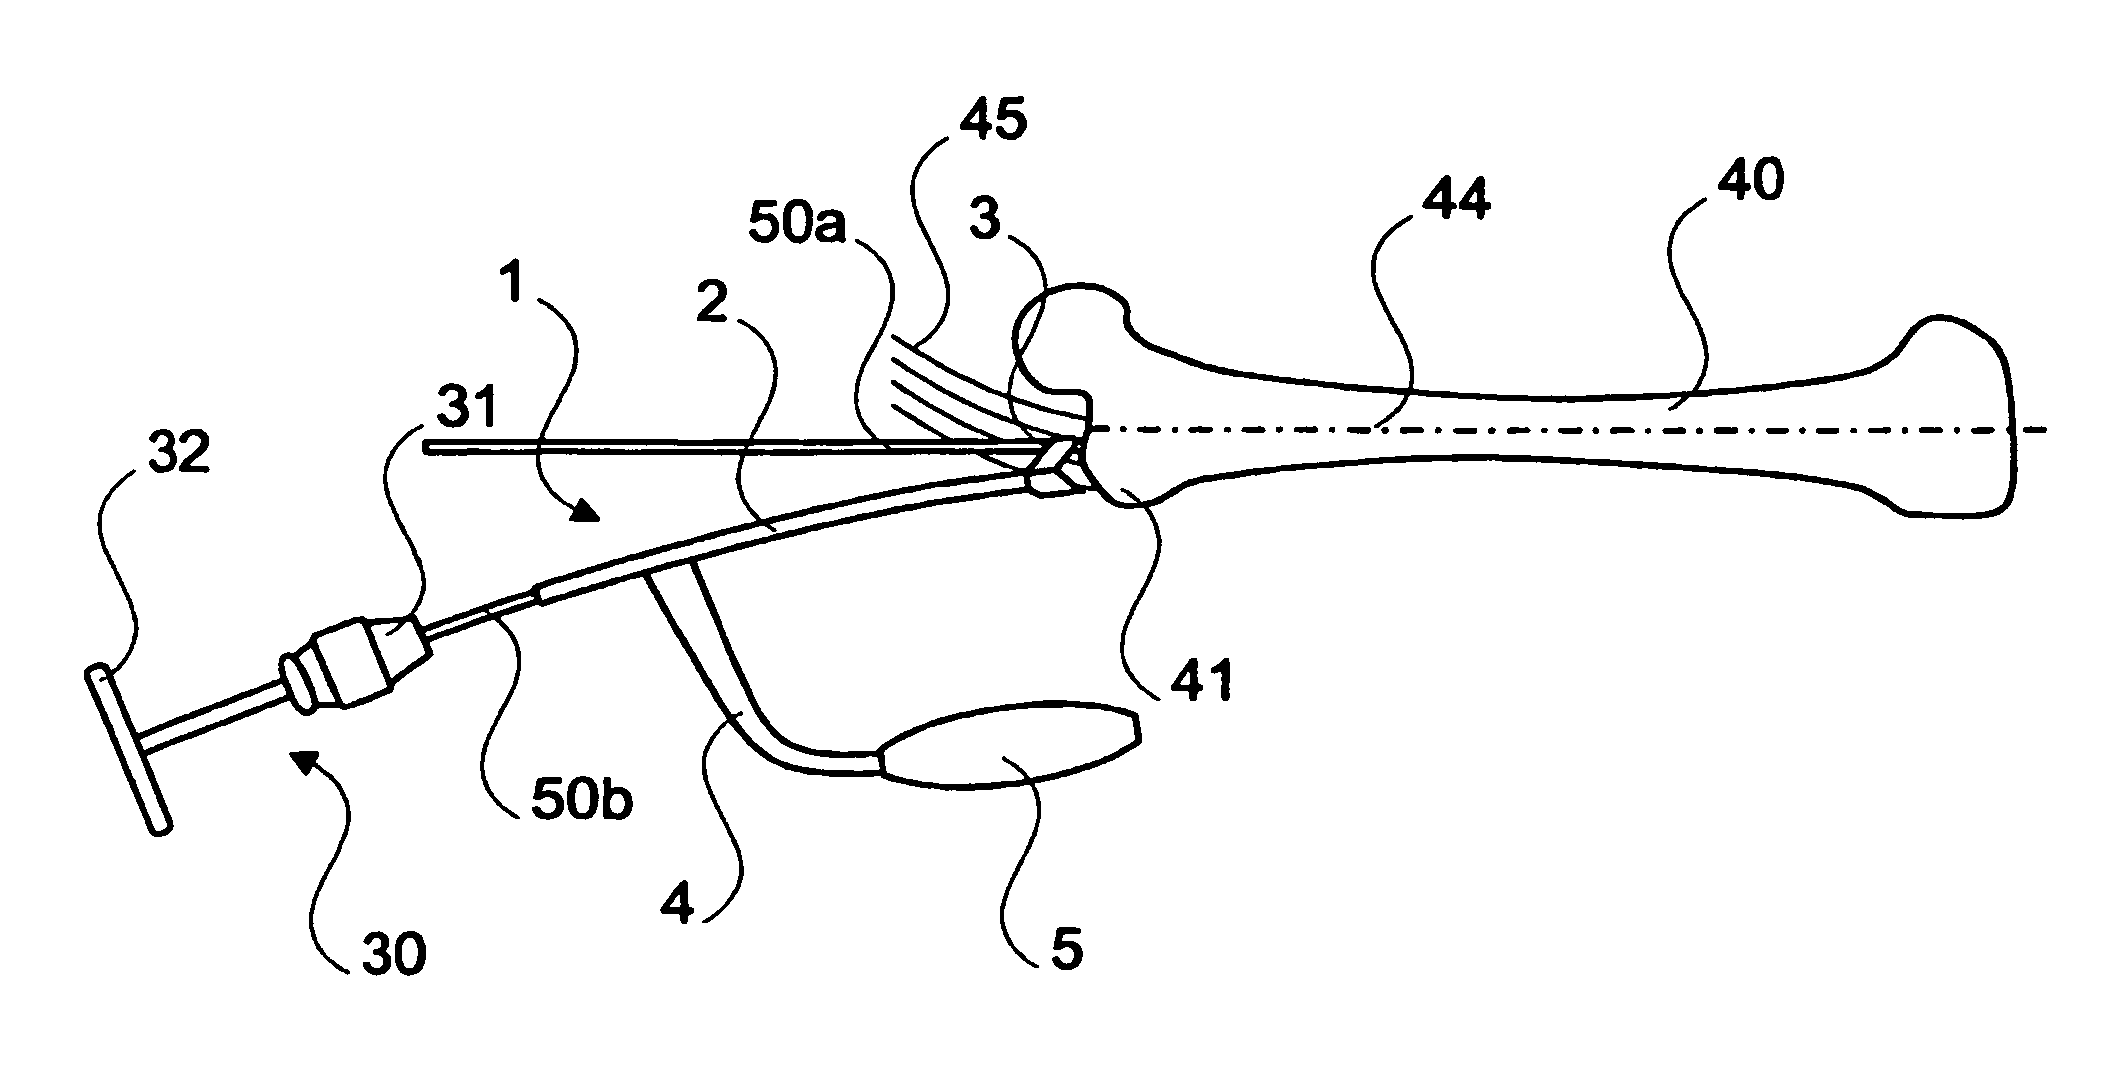 Curved positioning and insertion instrument for inserting a guide wire into the femur